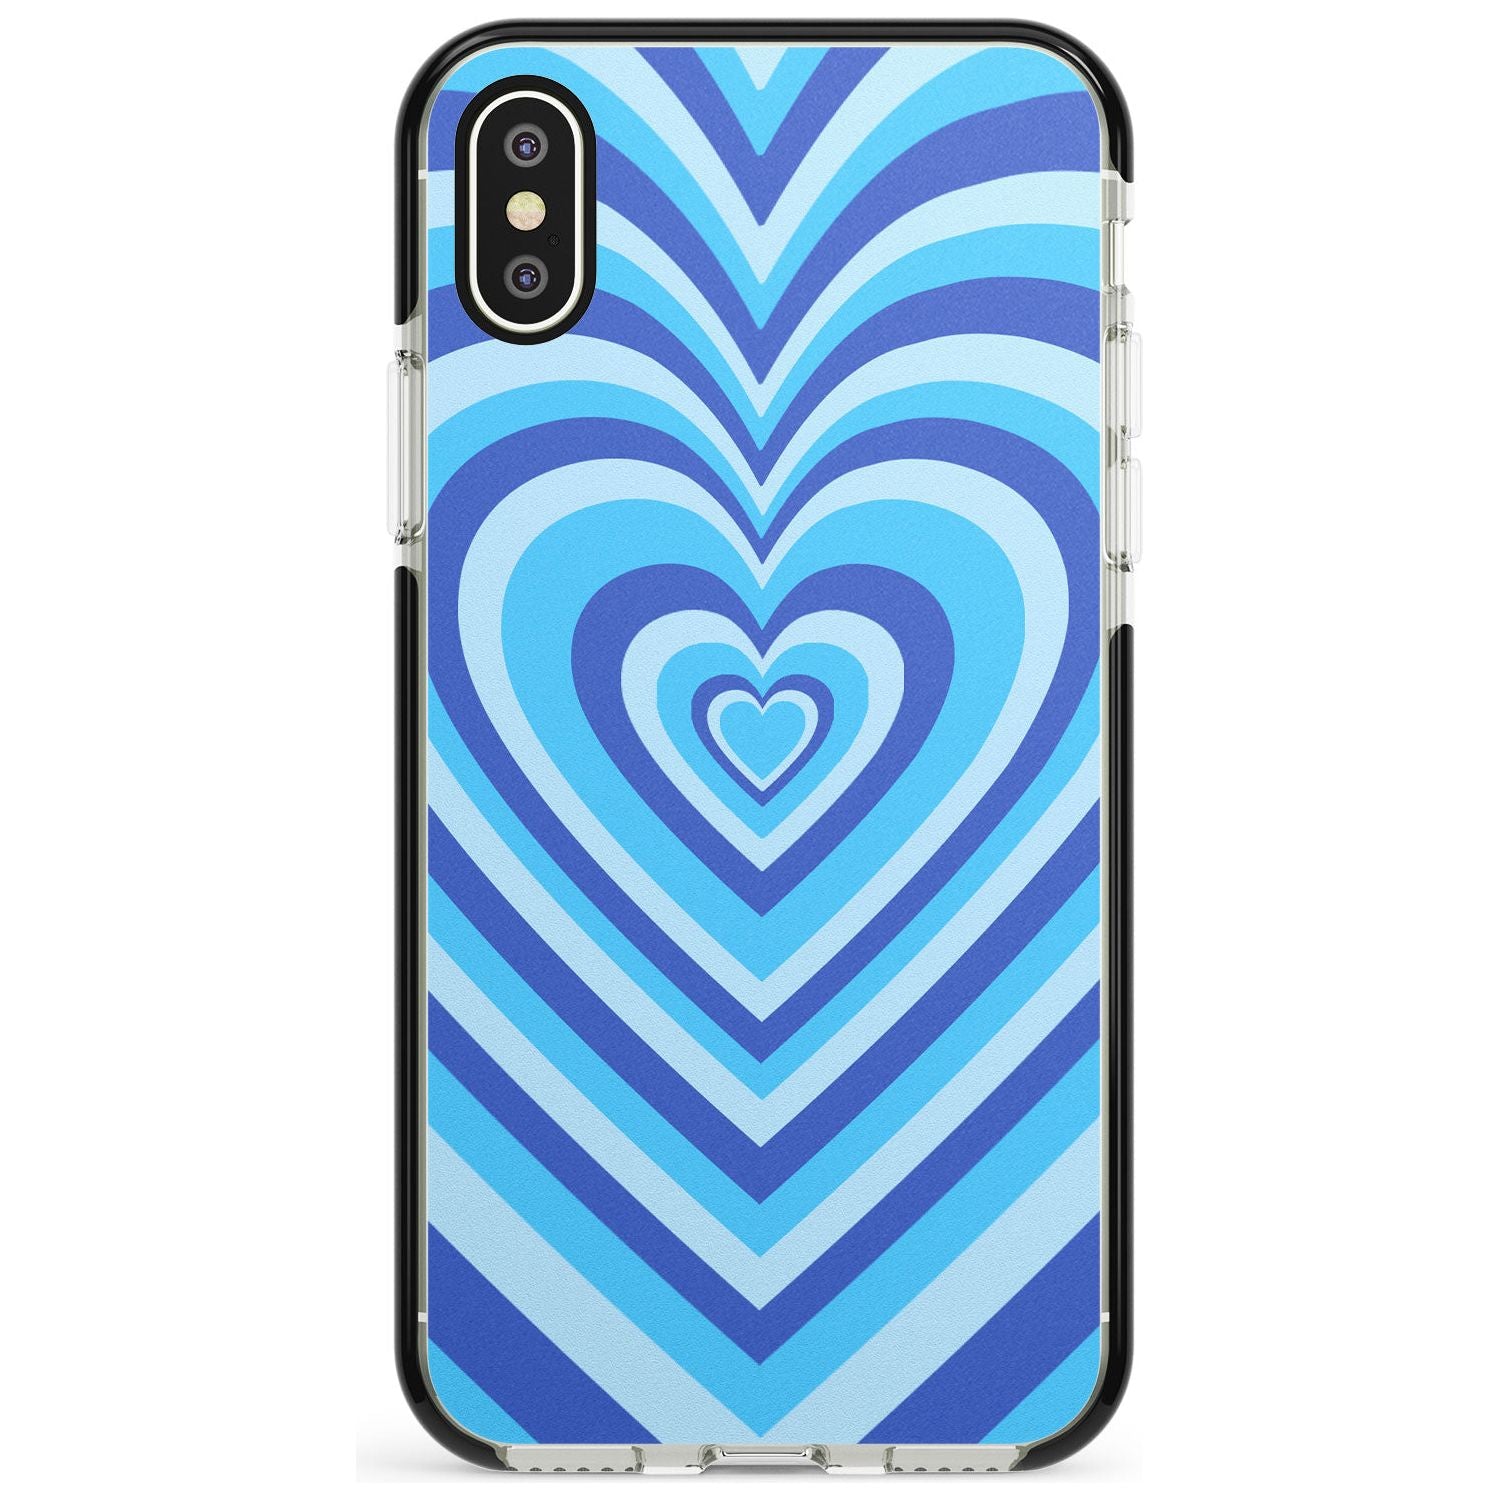 Blue Heart Illusion Black Impact Phone Case for iPhone X XS Max XR